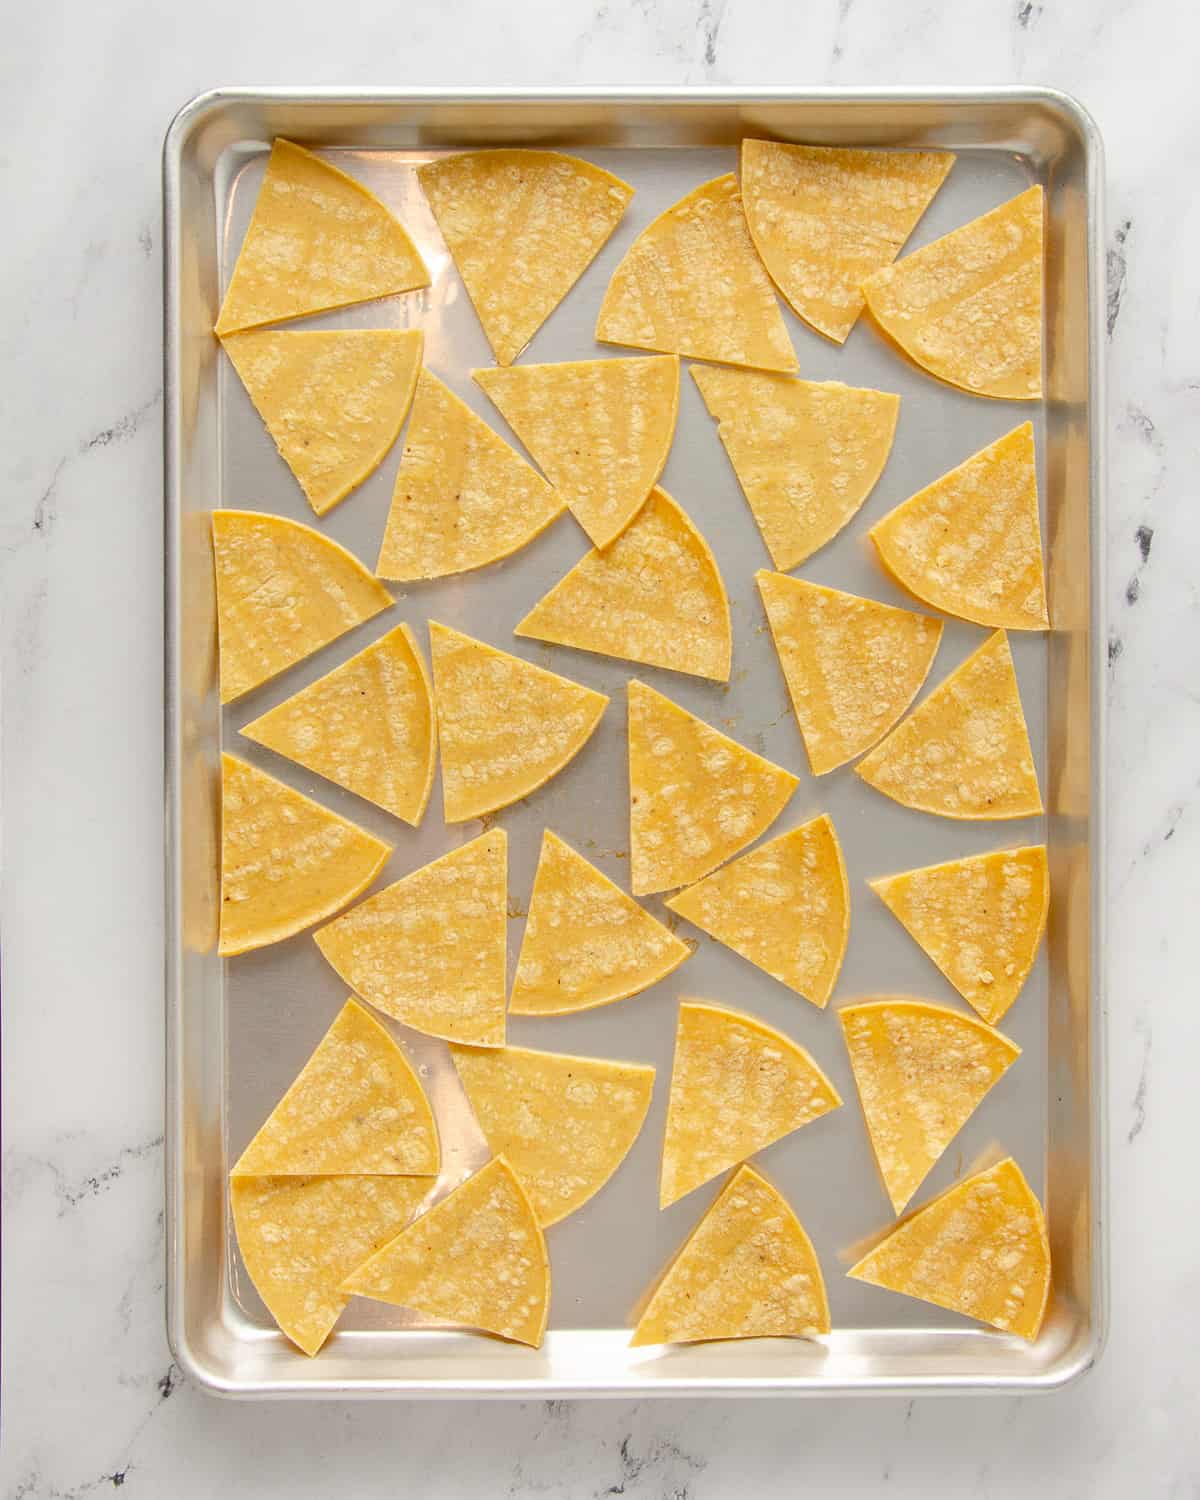 A baking tray with corn tortilla triangles before baking.